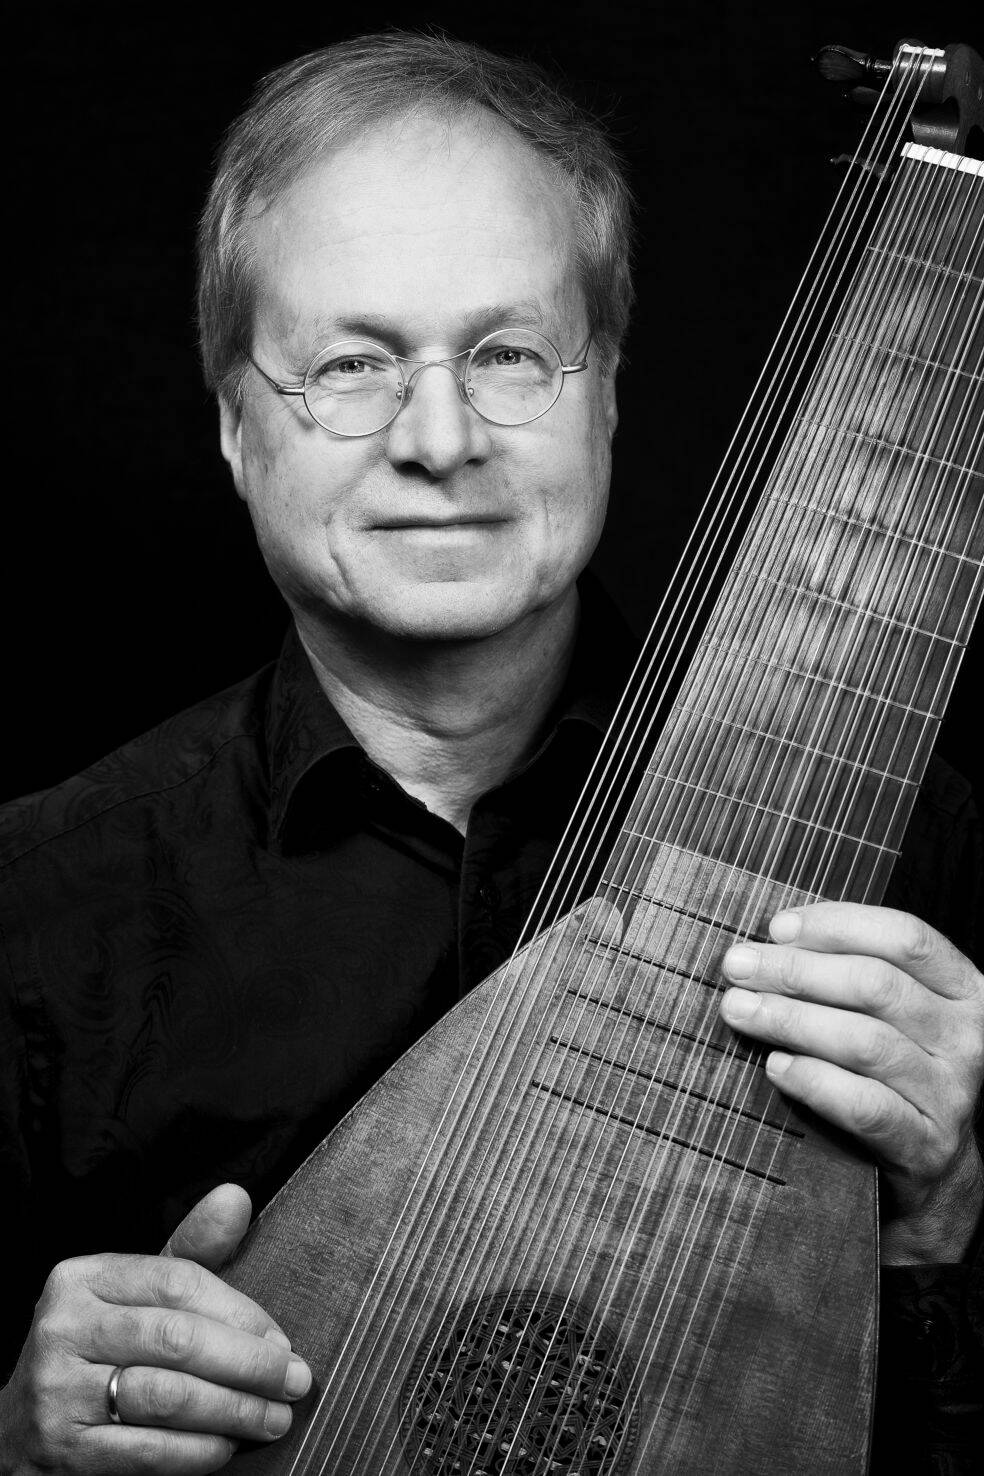 Michael Freimuth plays a long-necked lute known as the theorbo. (Photo by Sven Zimmermann)